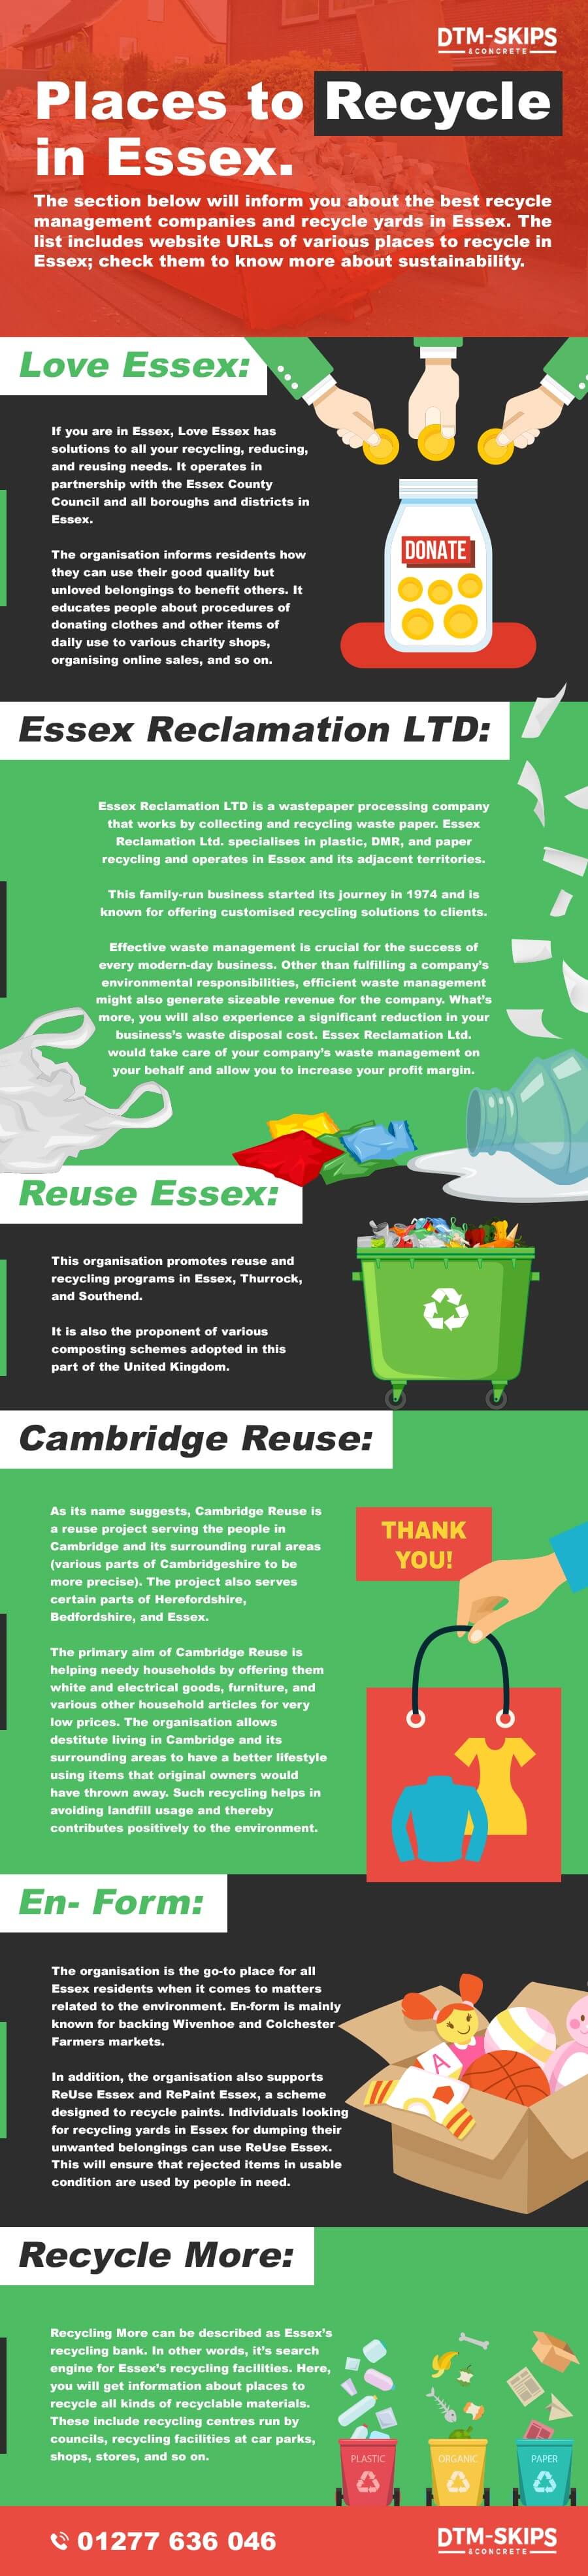 Places to Recycle in Essex